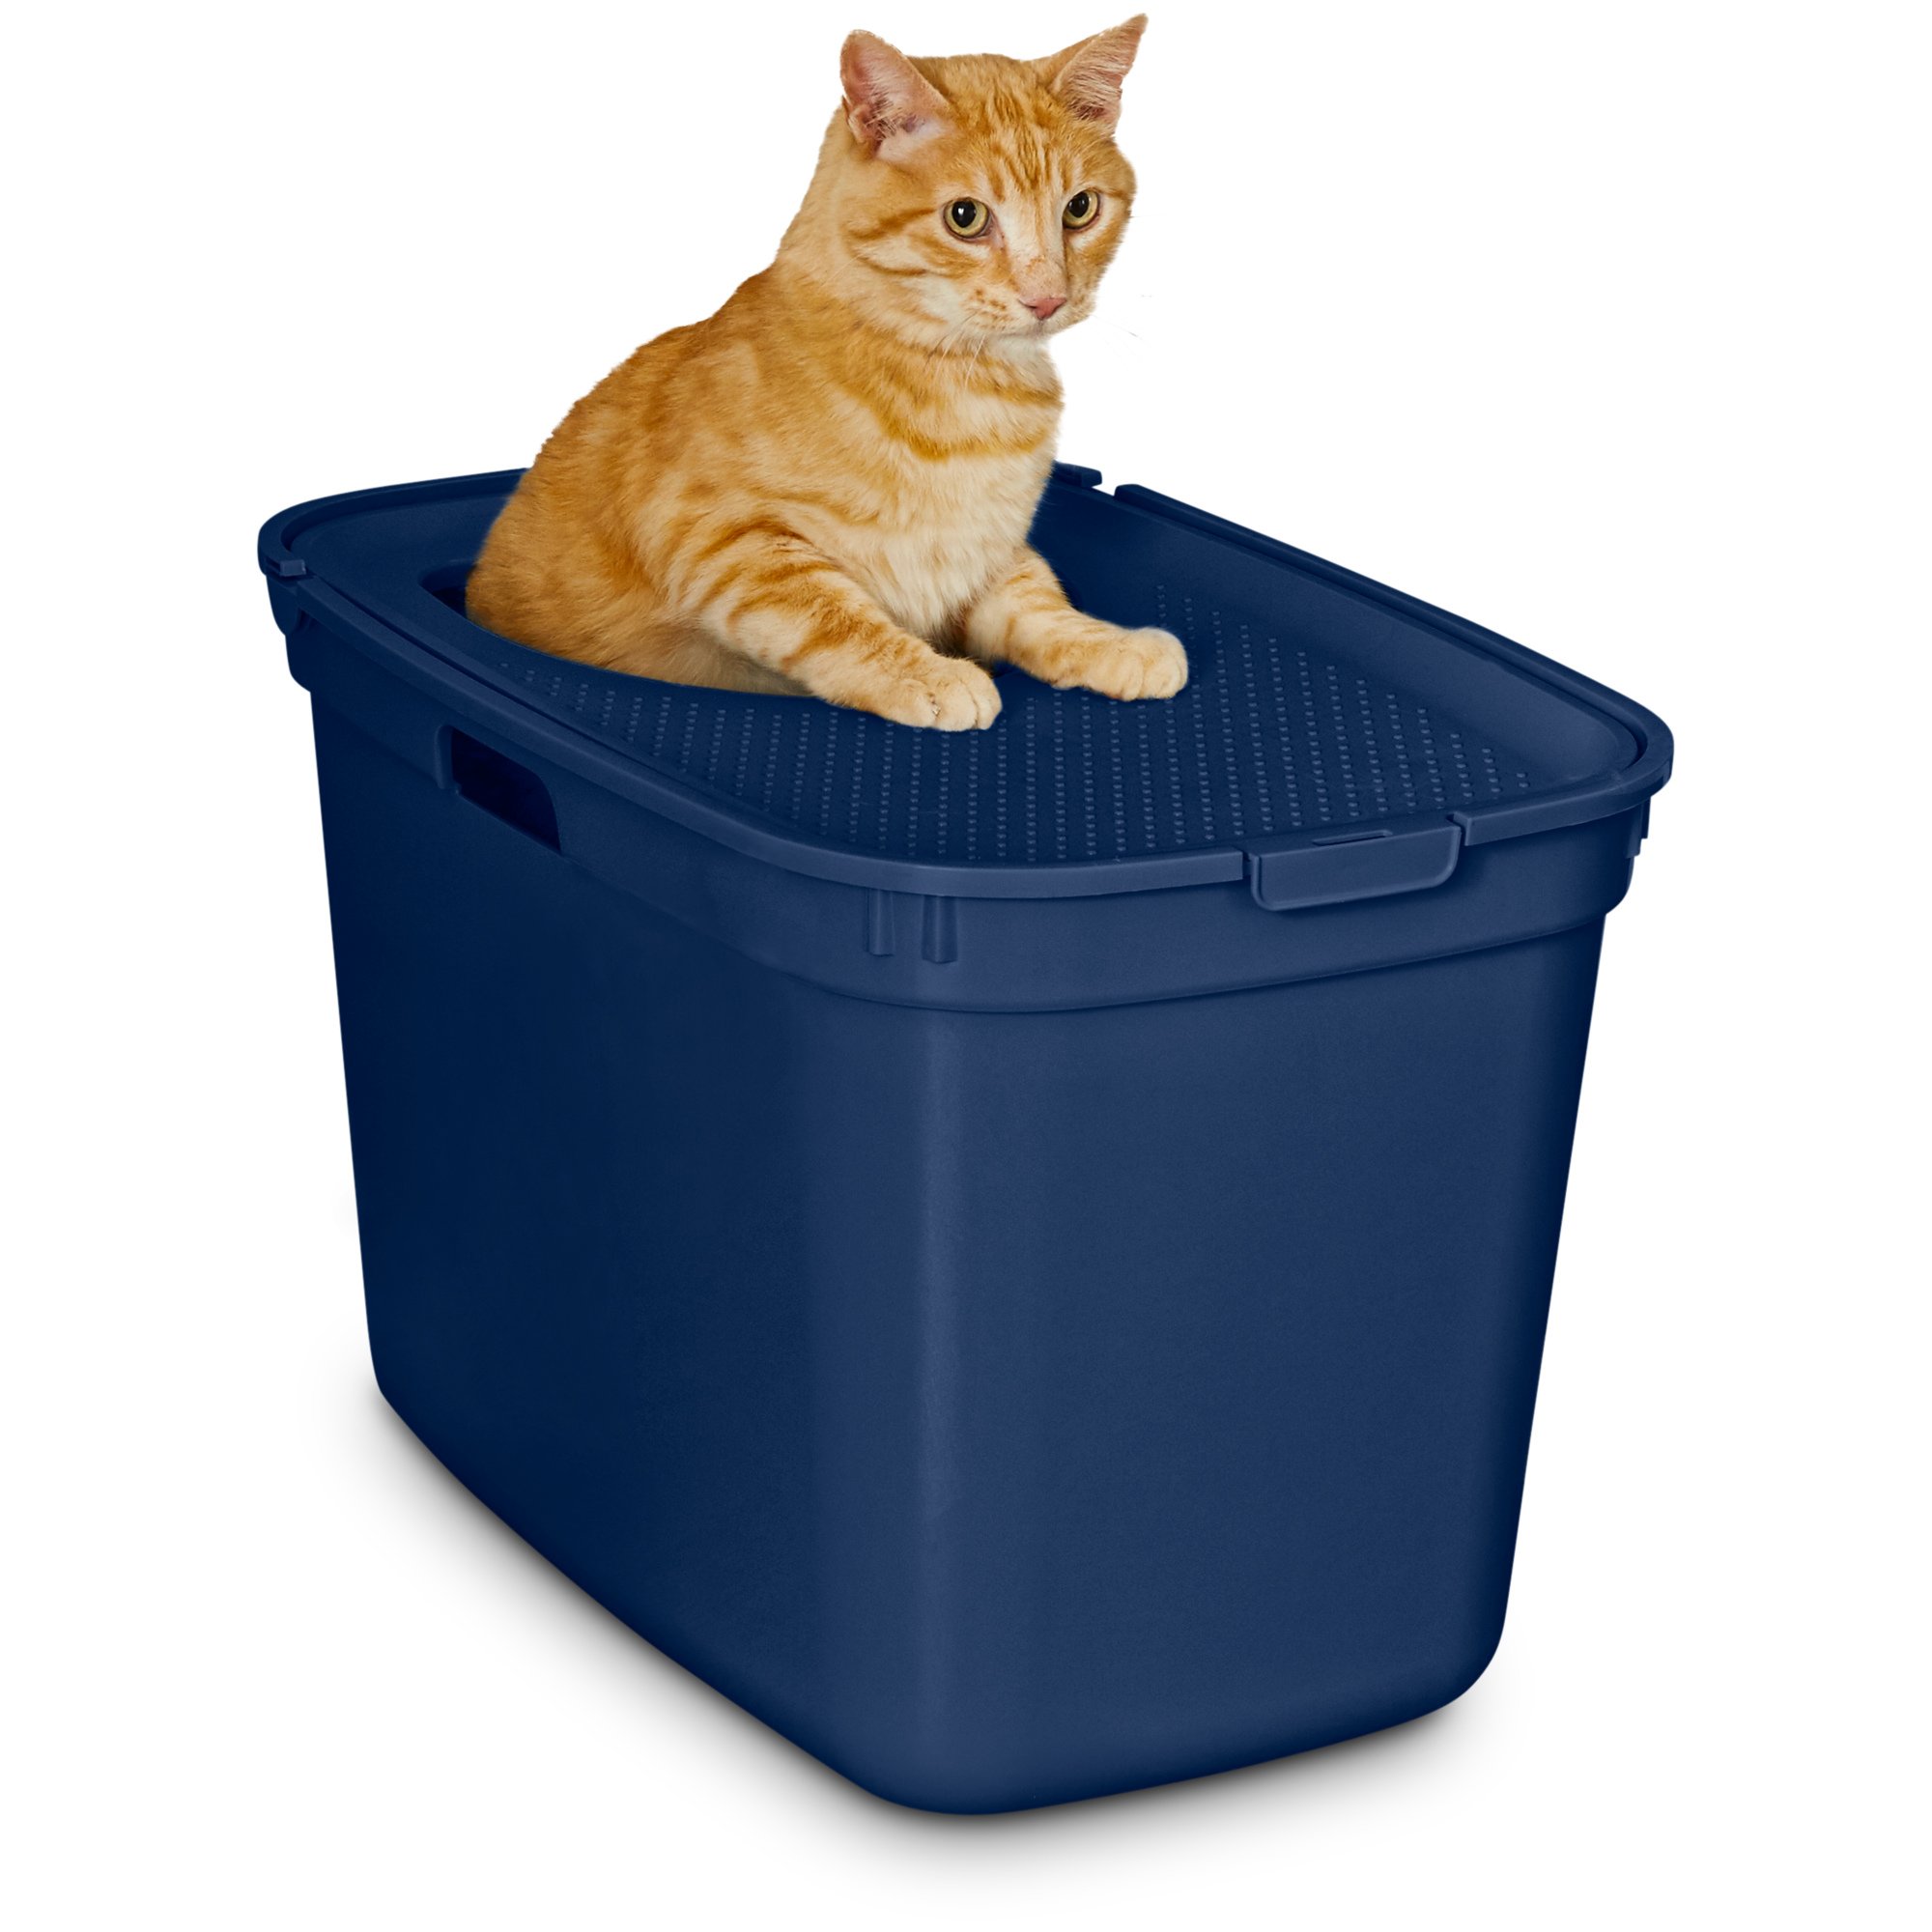 Top Entry Cat Litter Box Liners